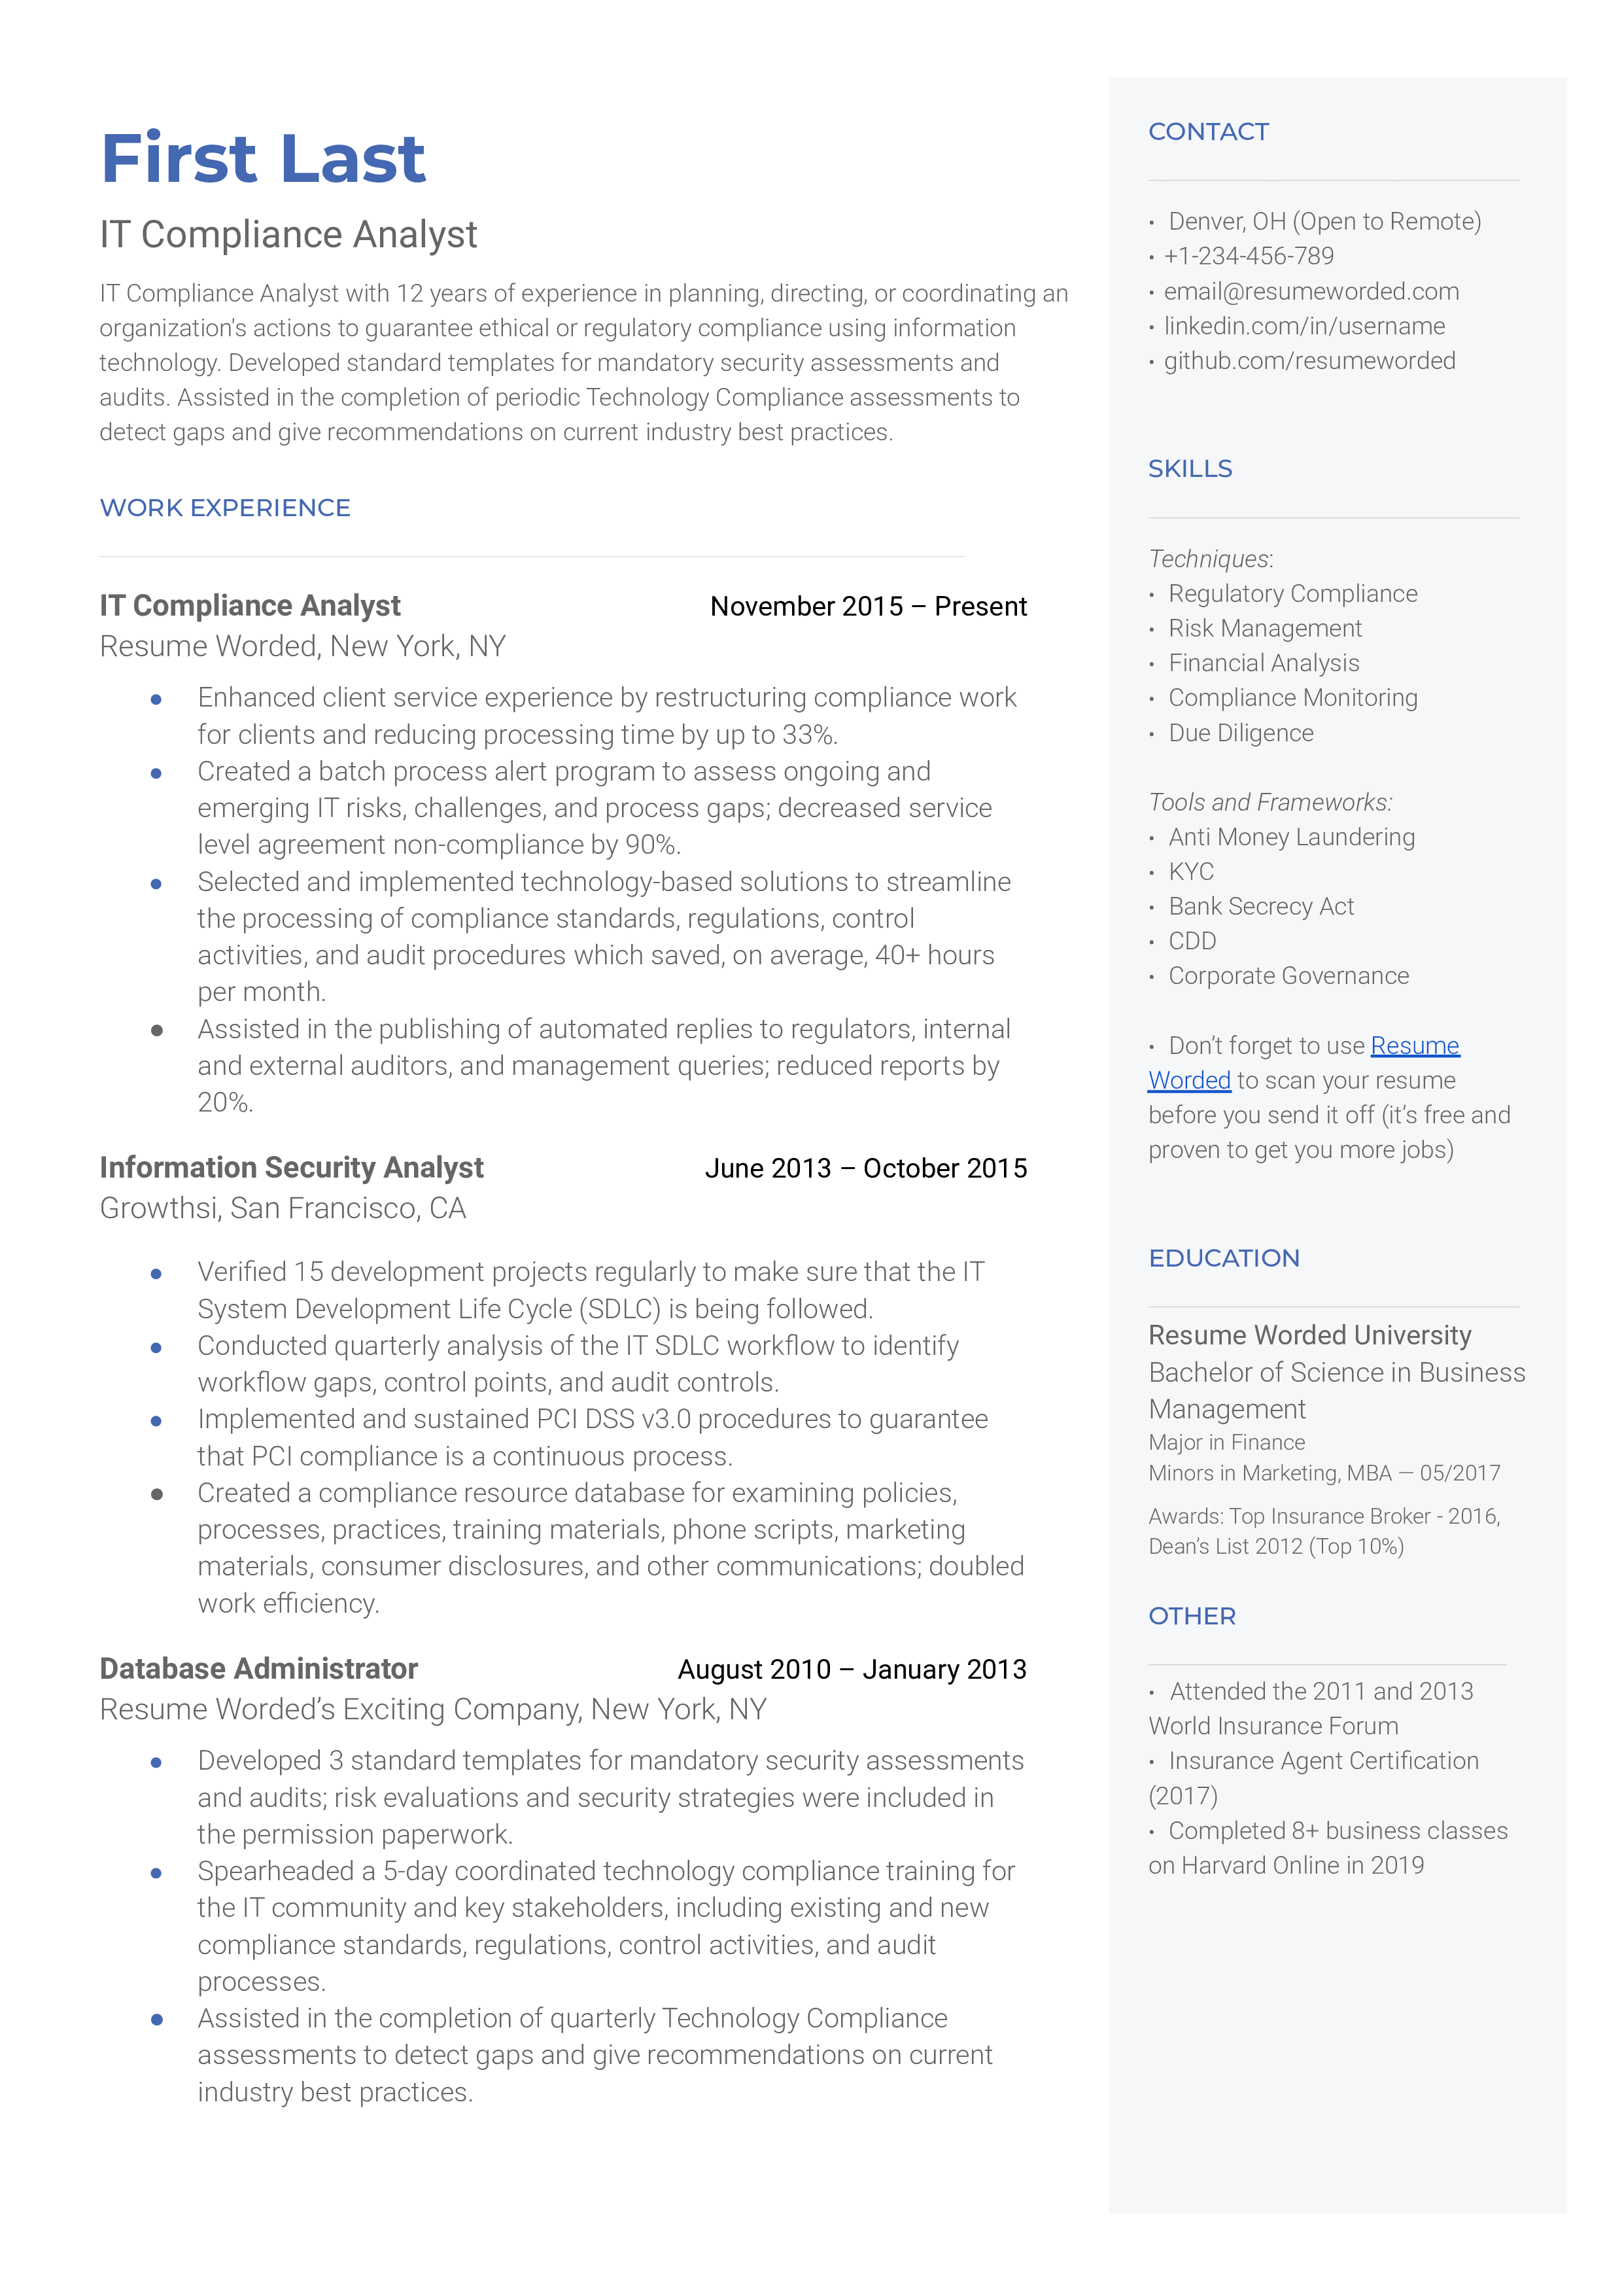 IT compliance analyst resume example